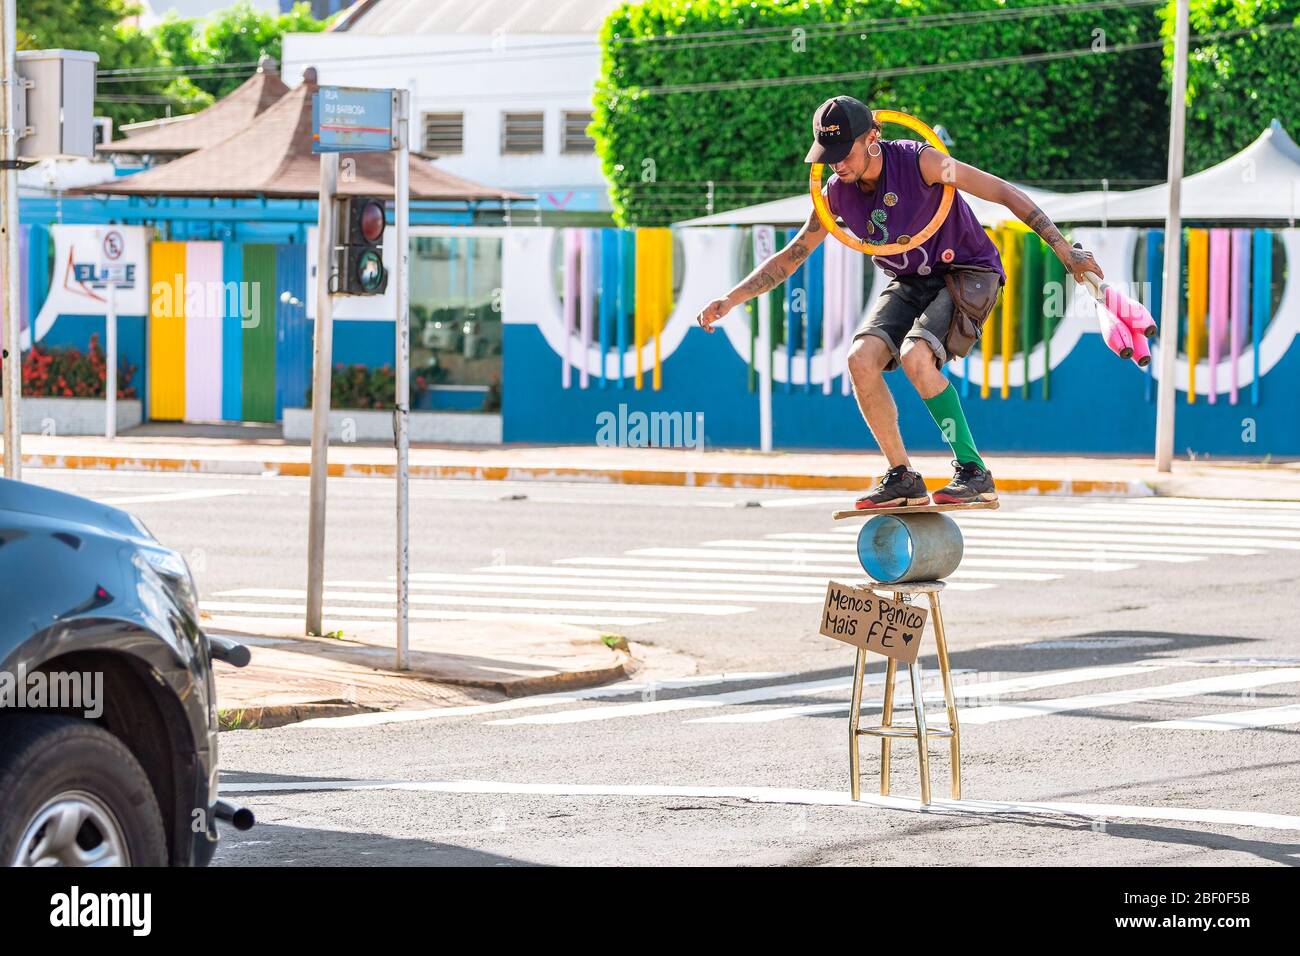 Campo Grande - MS, Brazil - March 30, 2020: Street artist during the traffic sign time doing some balance and juggling tricks at the Rui Barbosa stree Stock Photo